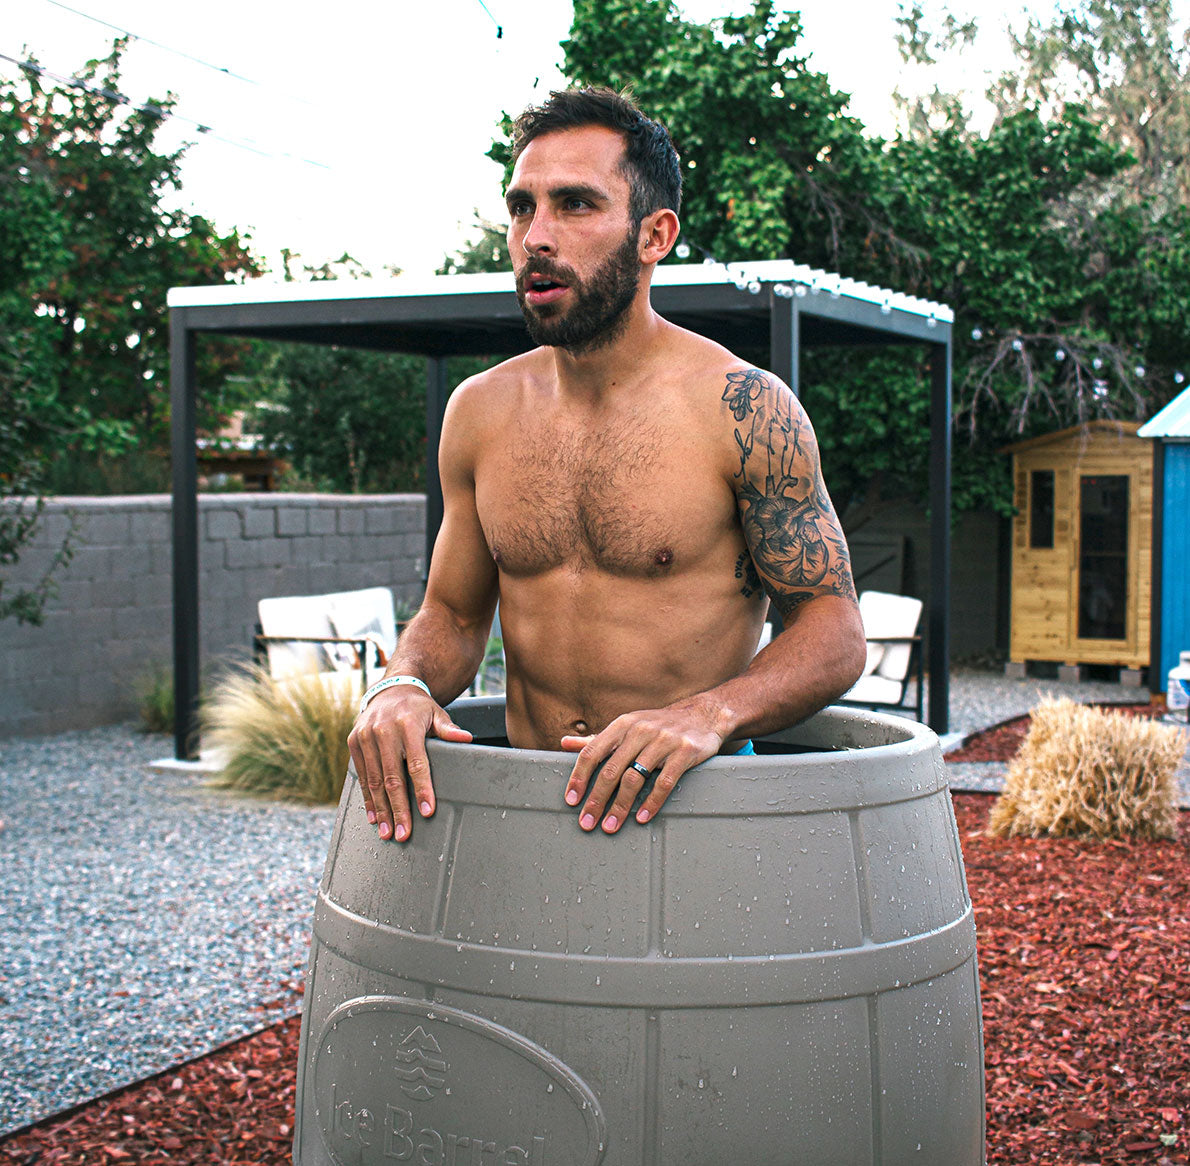 Ice Barrel 400 Cold Plunge with Athlete